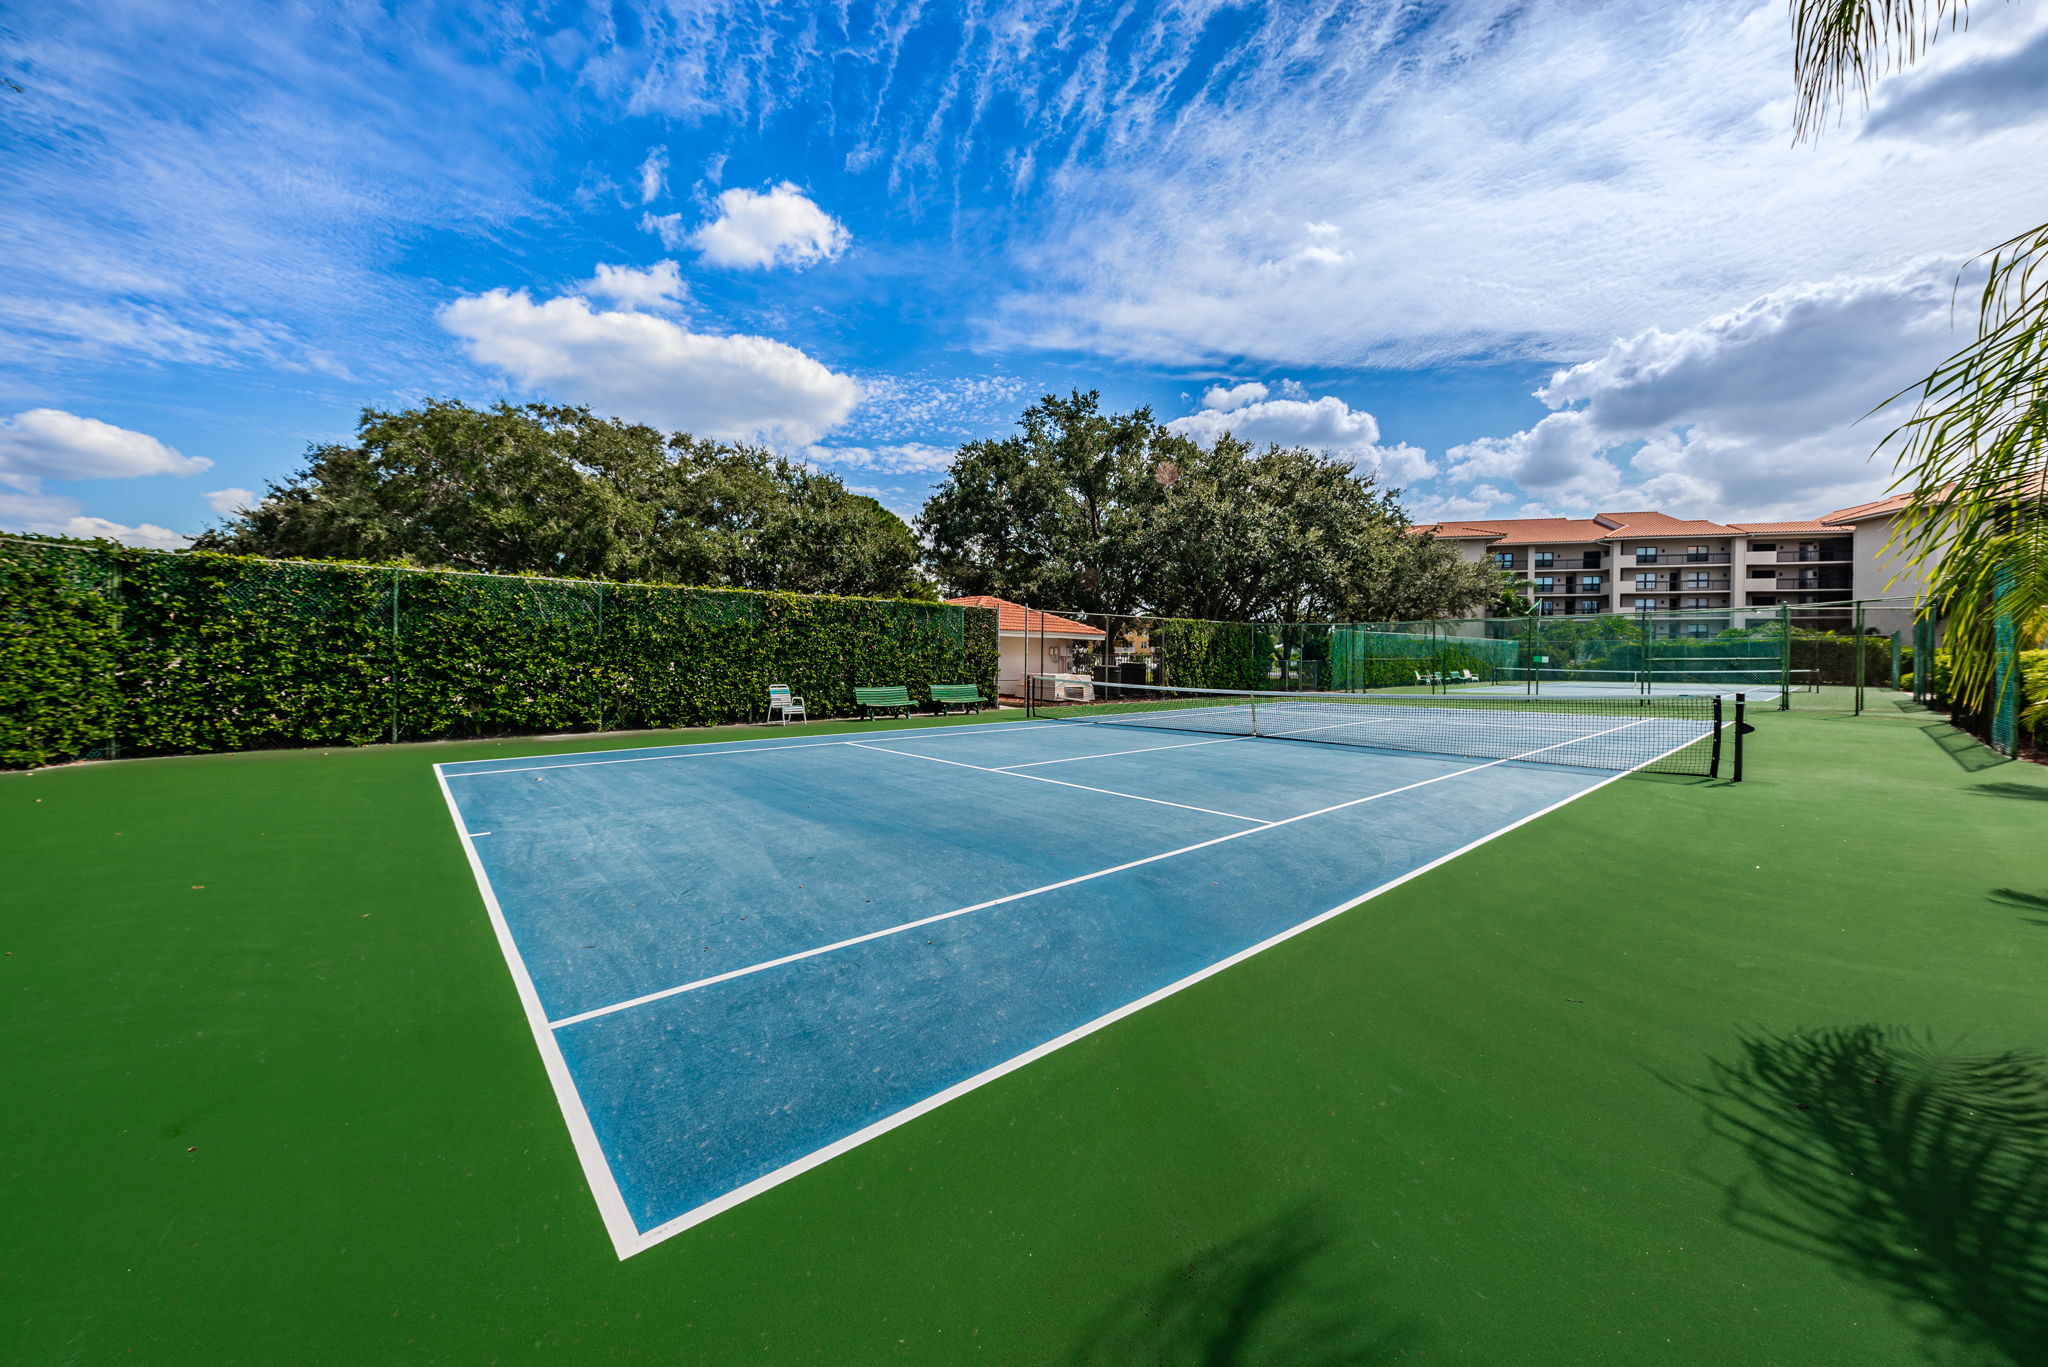 30-Tennis and Pickleball Court